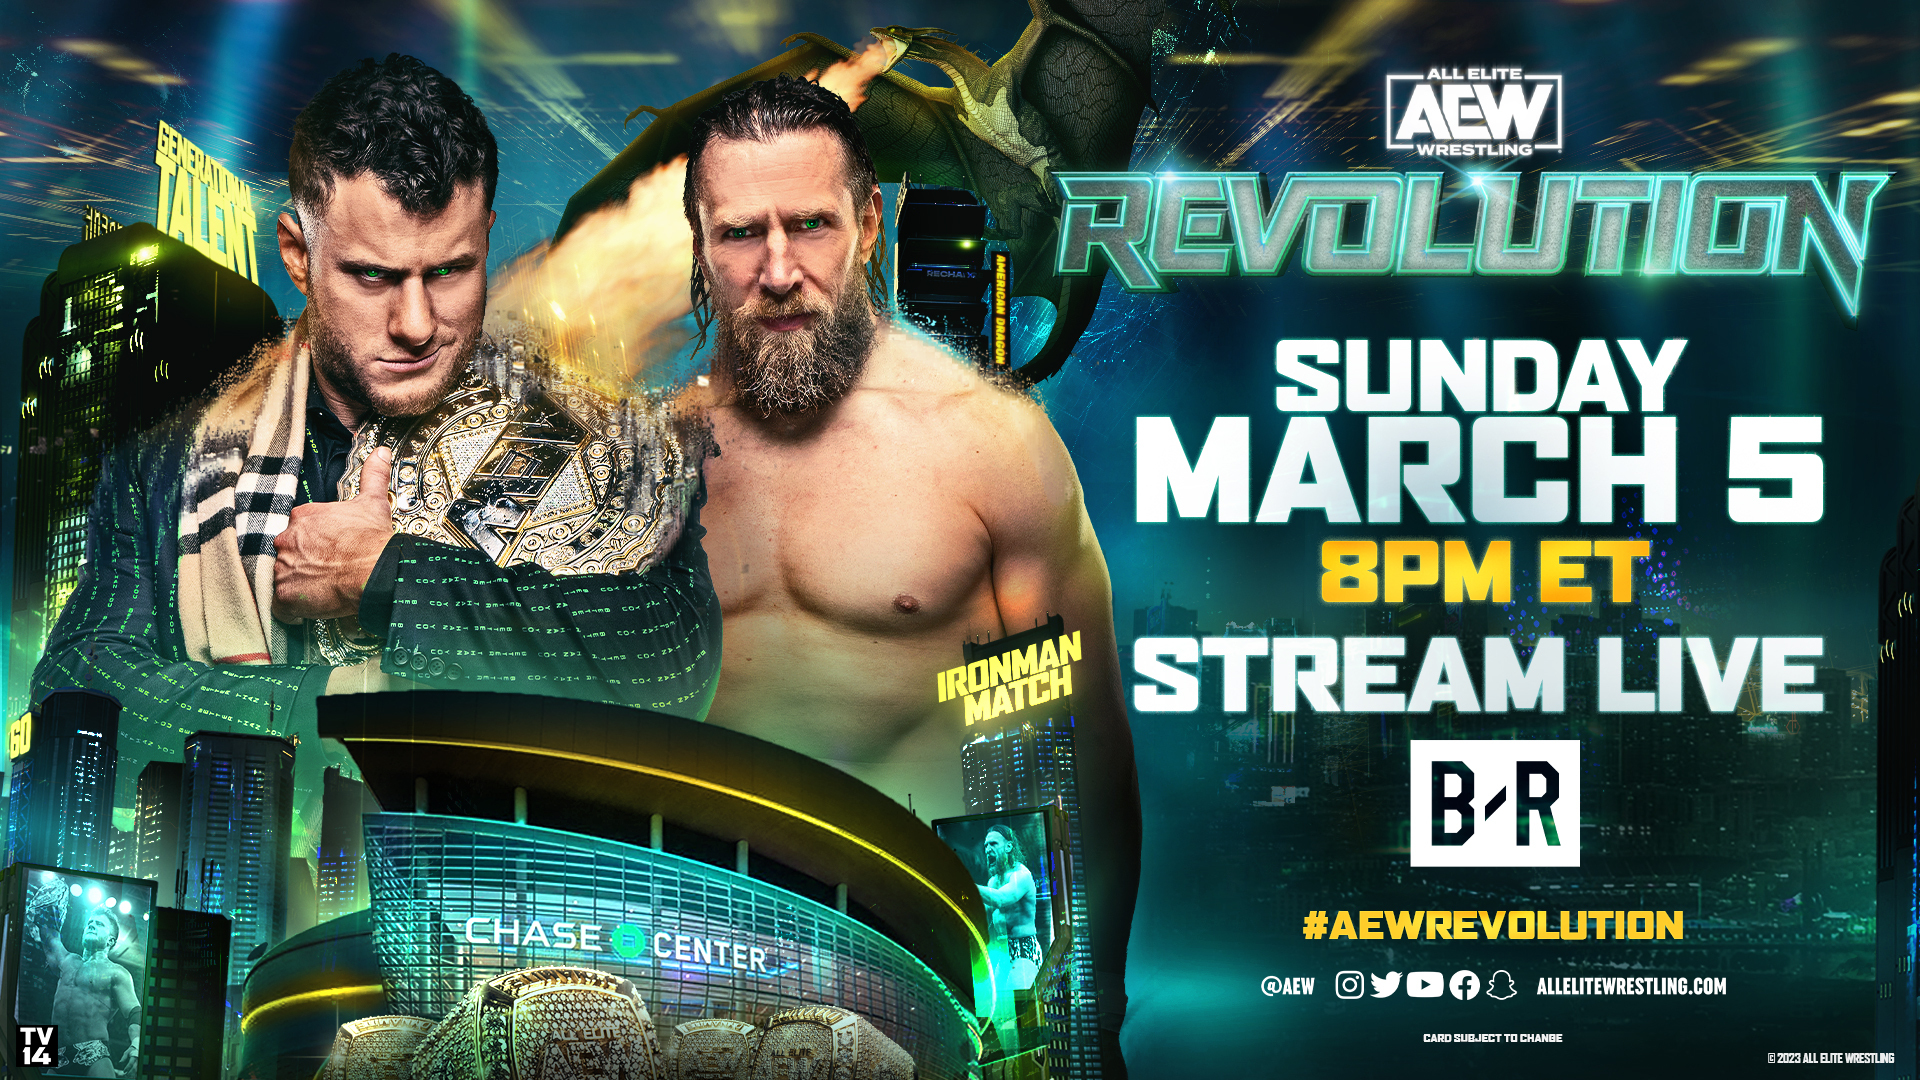 AEW REVOLUTION” Pay-Per-View Event to Stream on Bleacher Report Sunday, March 5 at 8 PM ET for $49.99 Warner Bros